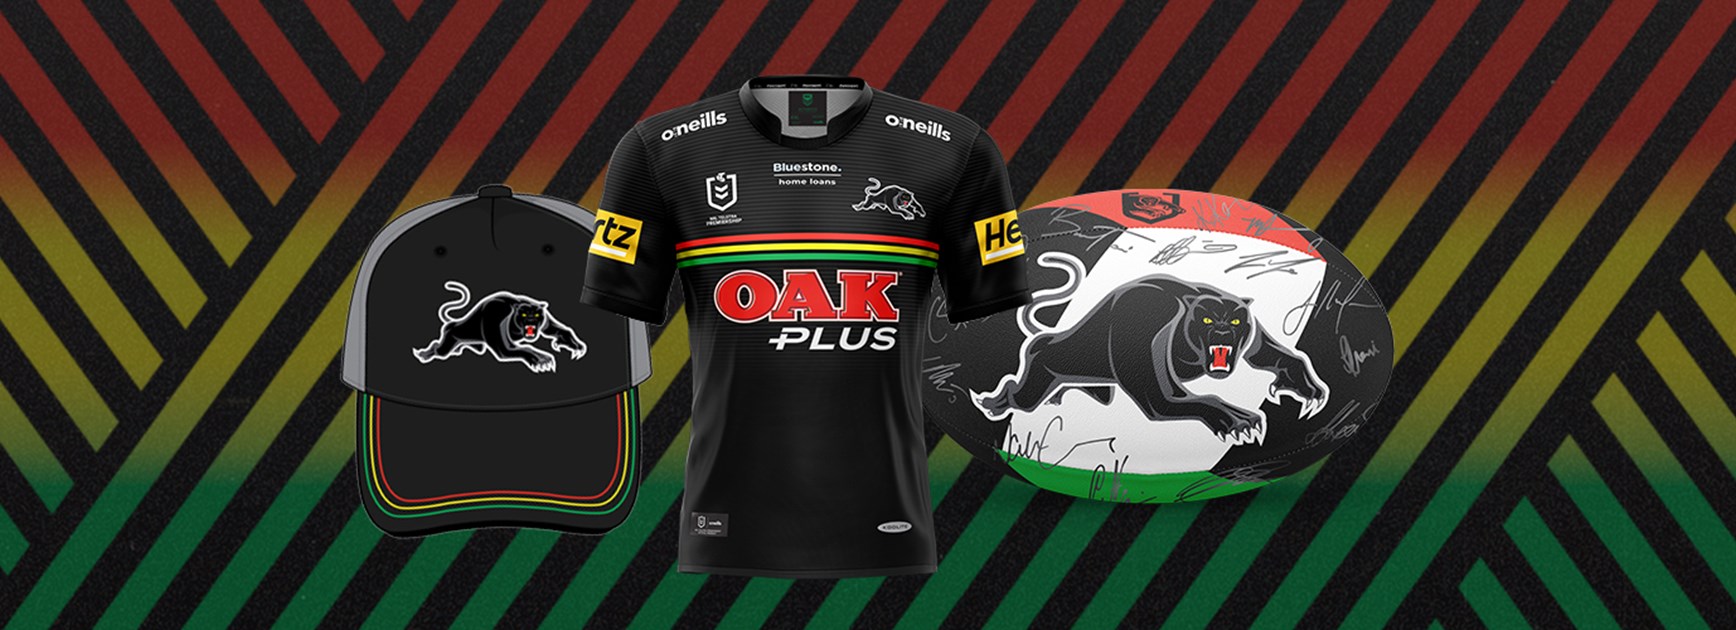 Win a Panther Pride Supporter Pack thanks to Hertz